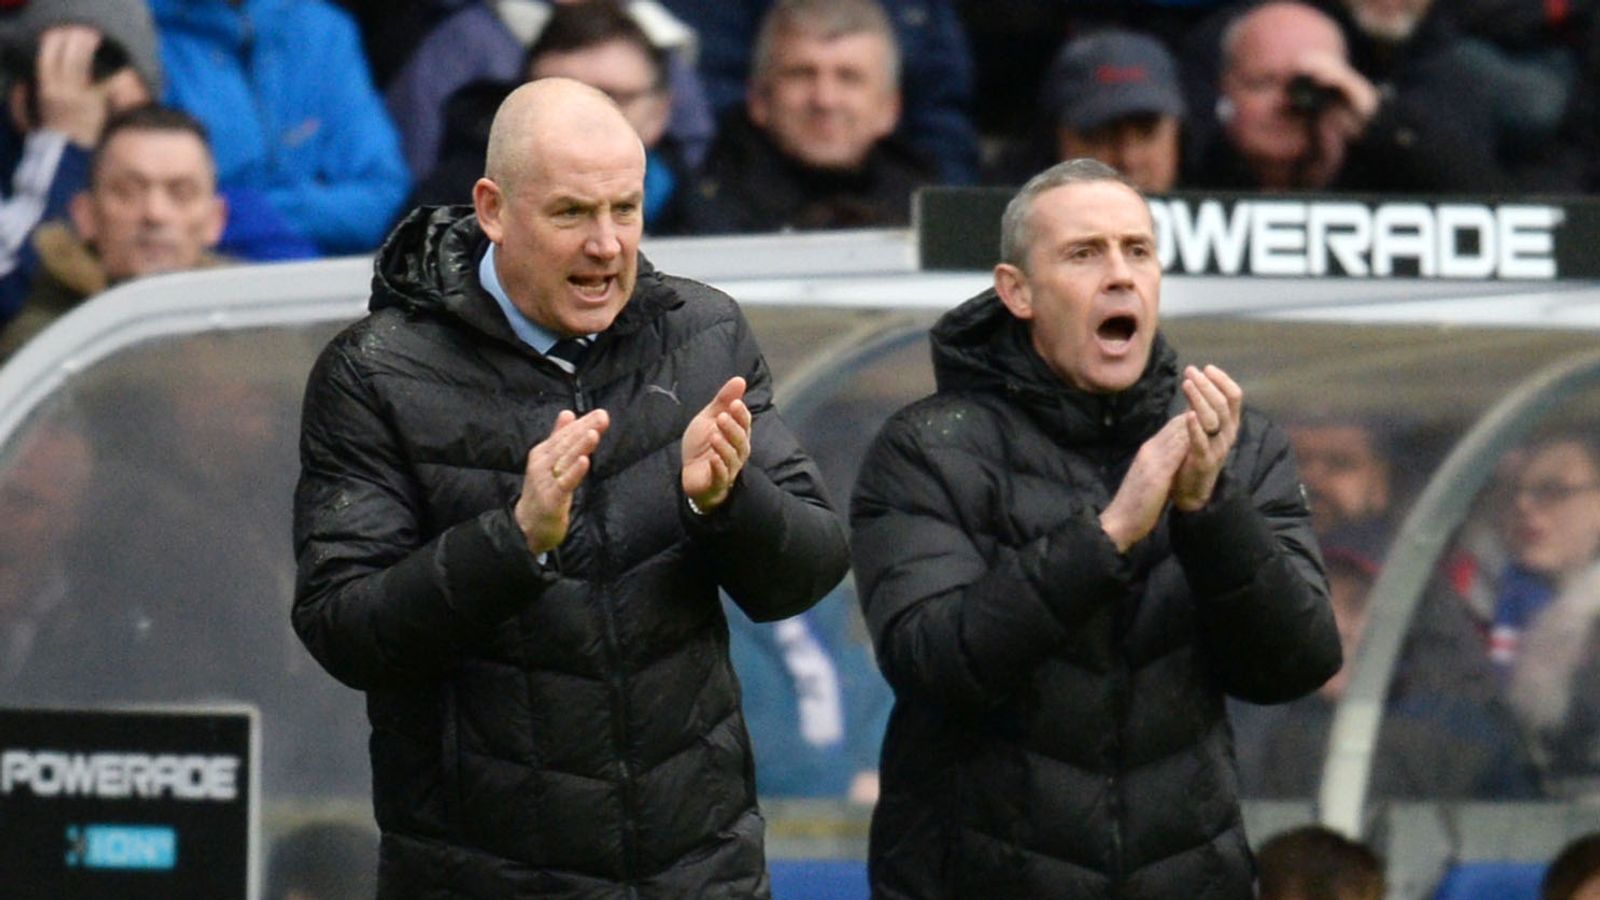 Mark Warburton and David Weir sign new Rangers contracts | Football ...